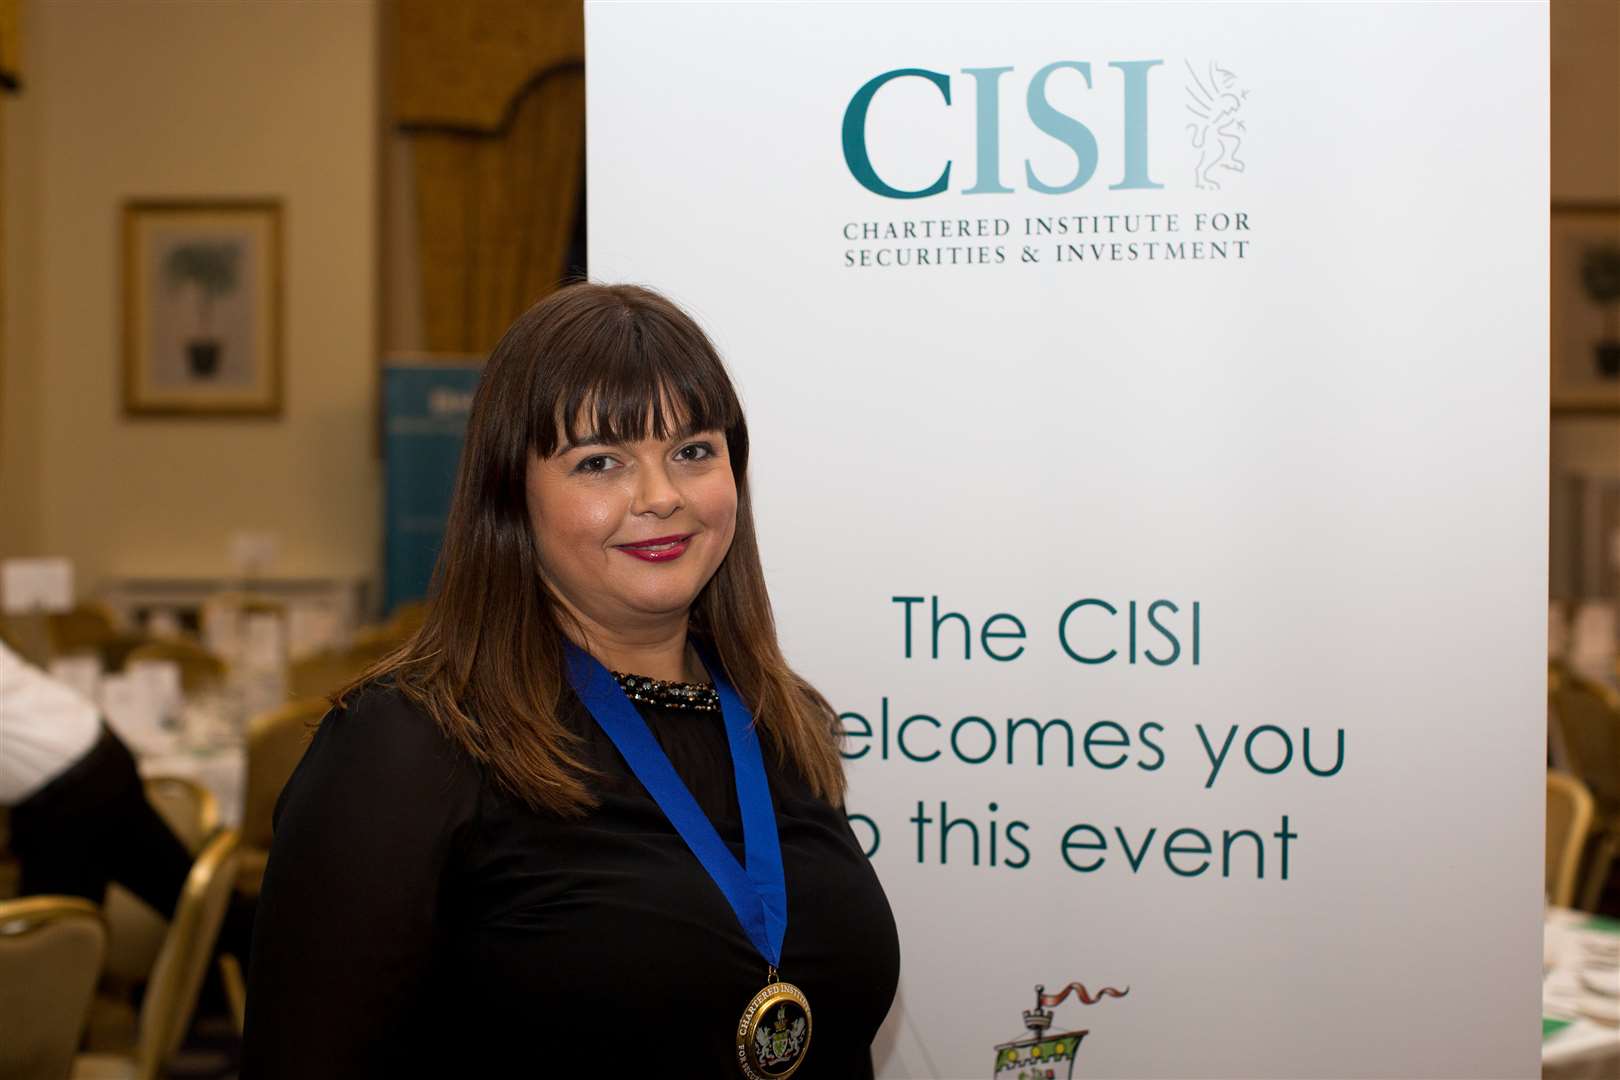 Katie Presland has been elected as president of the South East branch of the Chartered Institute for Securities & Investment (CISI)